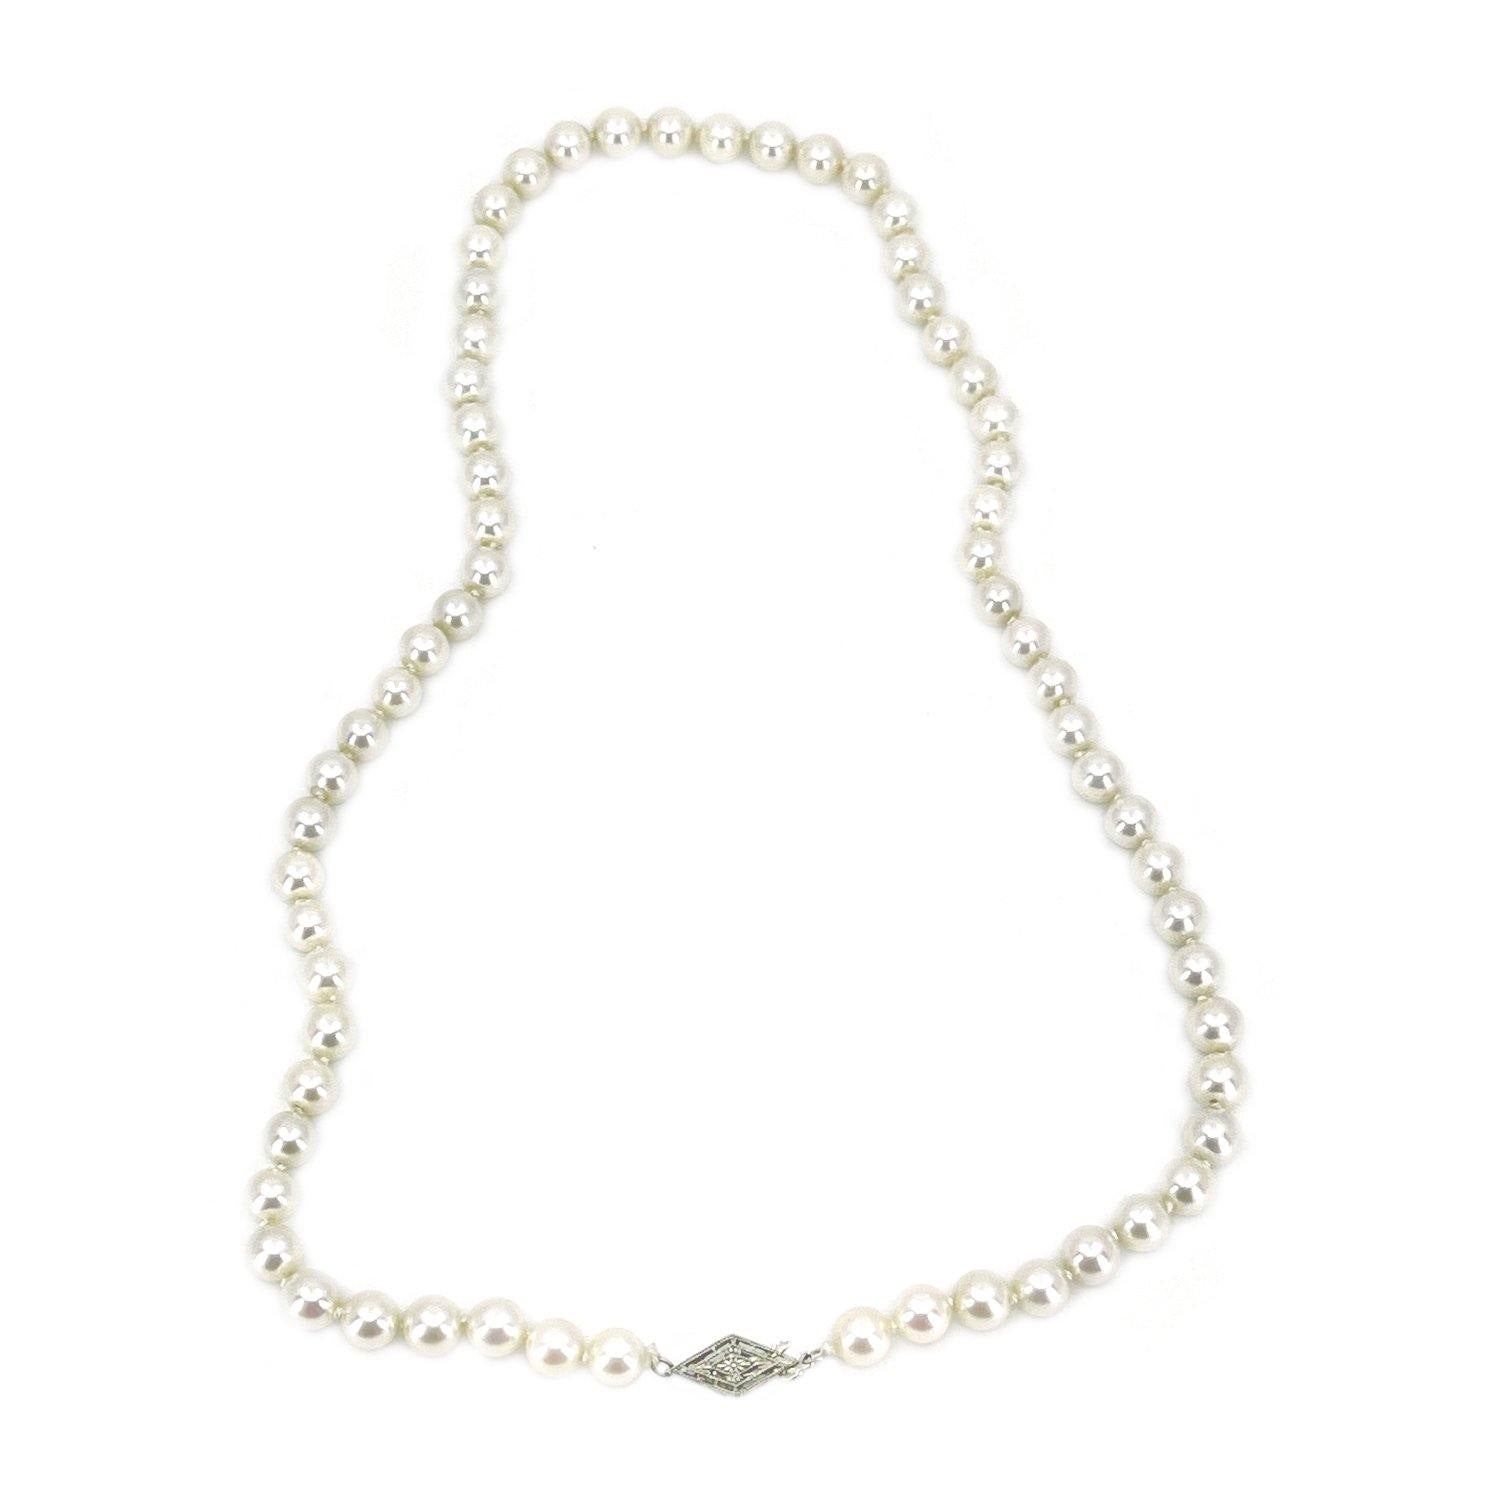 Art Deco Japanese Saltwater Cultured Akoya Pearl Necklace - 18K White Gold 18 Inch